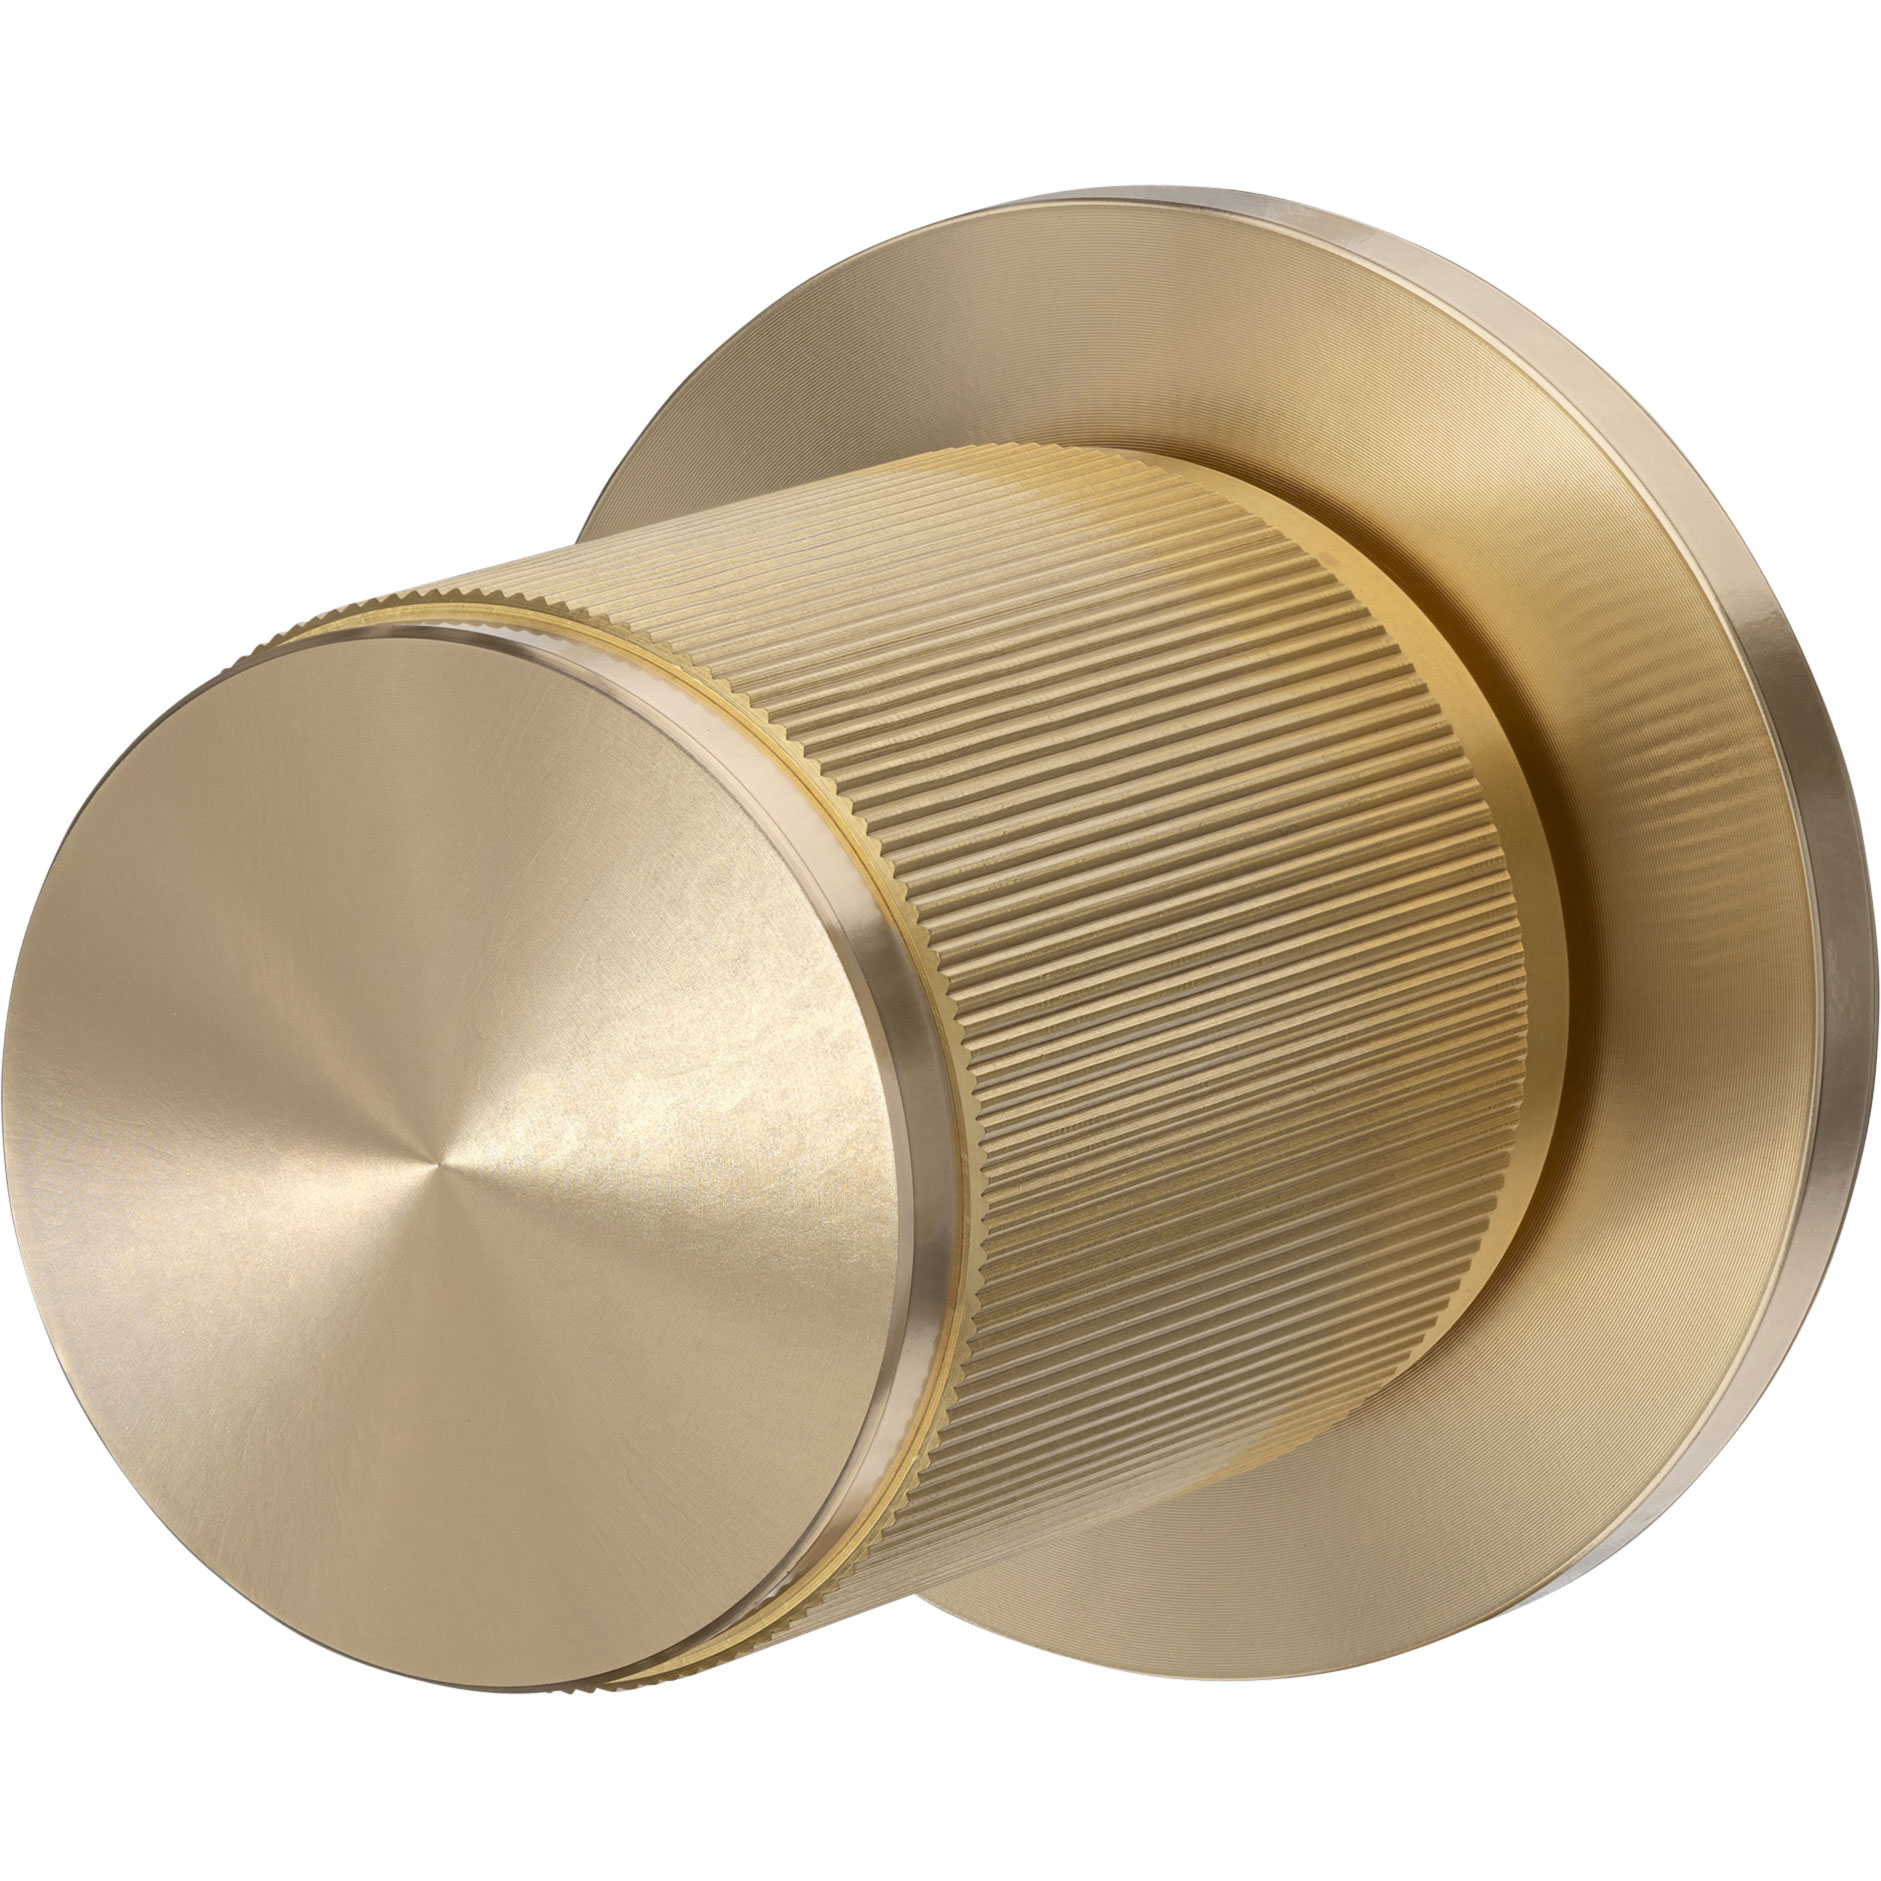 Buster + Punch Door Knob Double Sided Linear, Brass Messing Metall